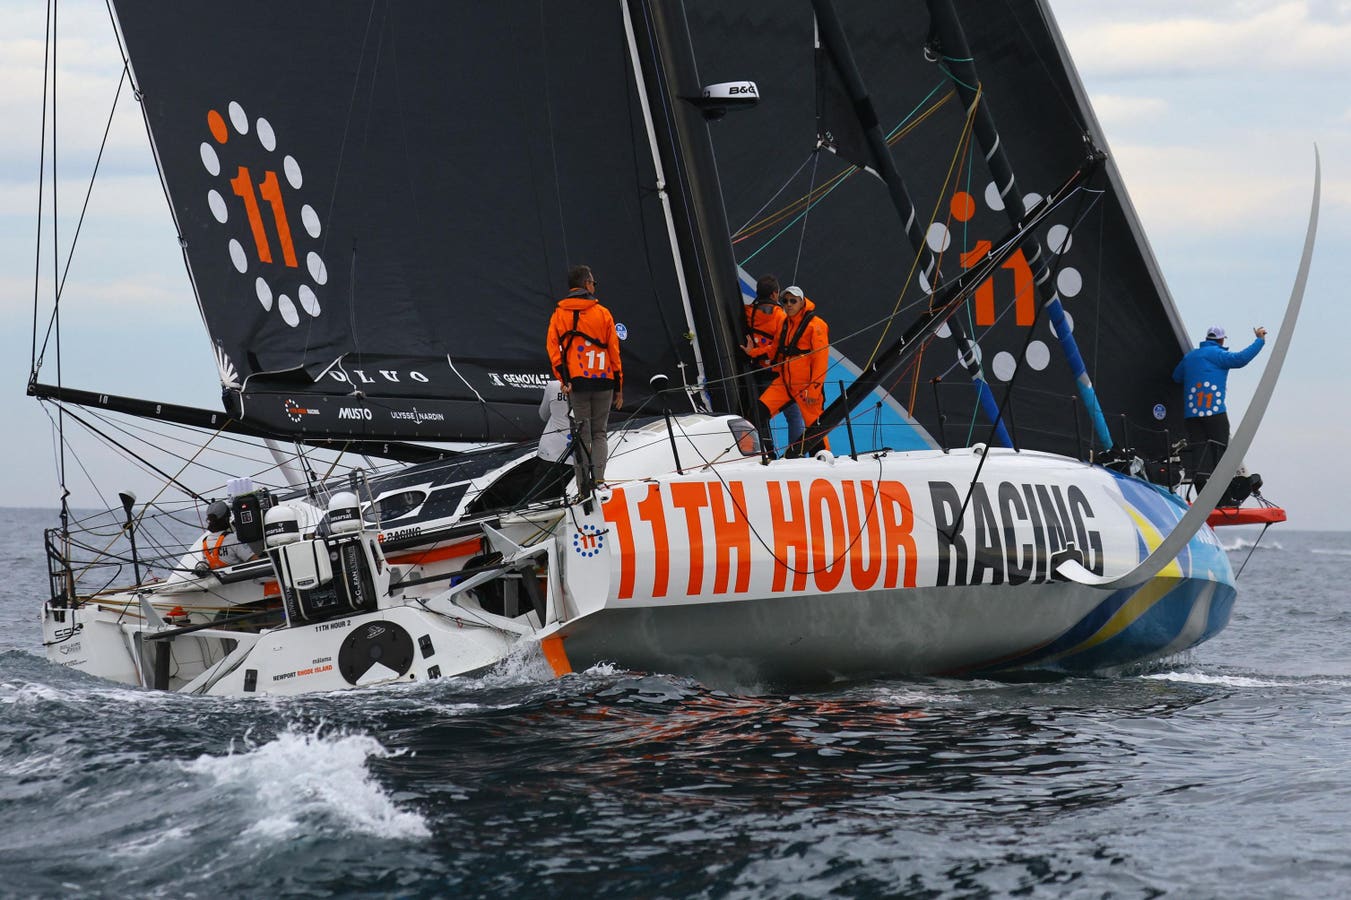 11th Hour Racing And IMOCA Partner To Protect Oceans And Empower Women